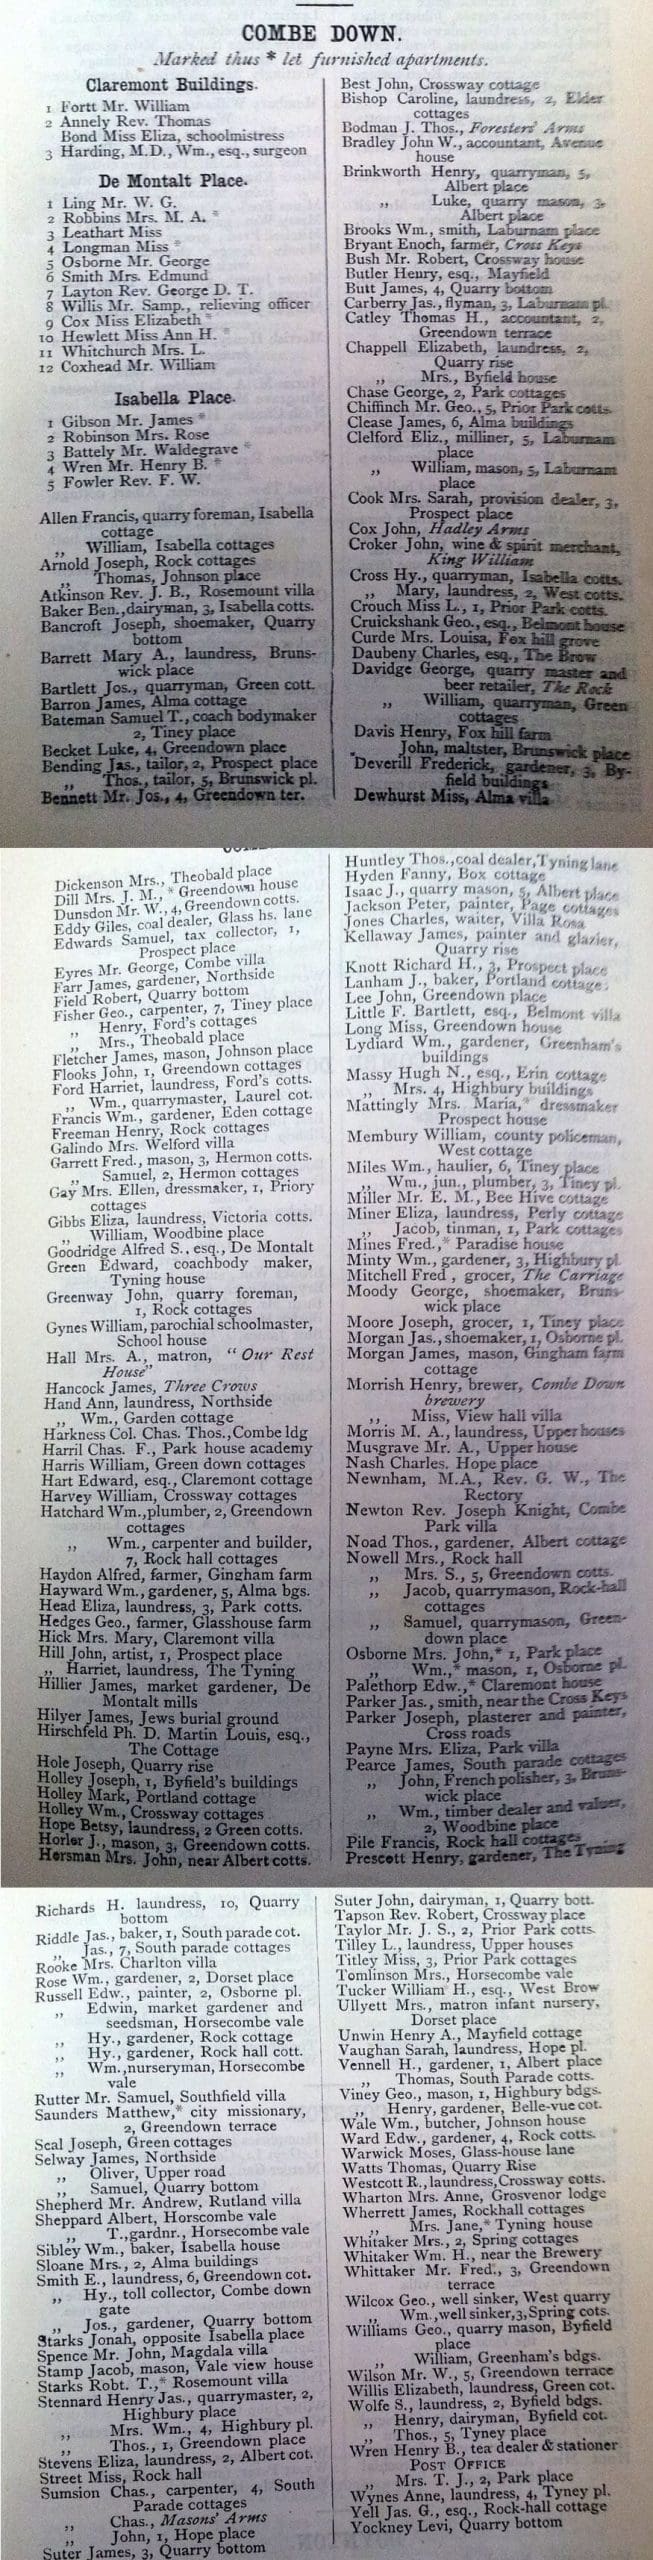 1874 Post Office Directory for Combe Down